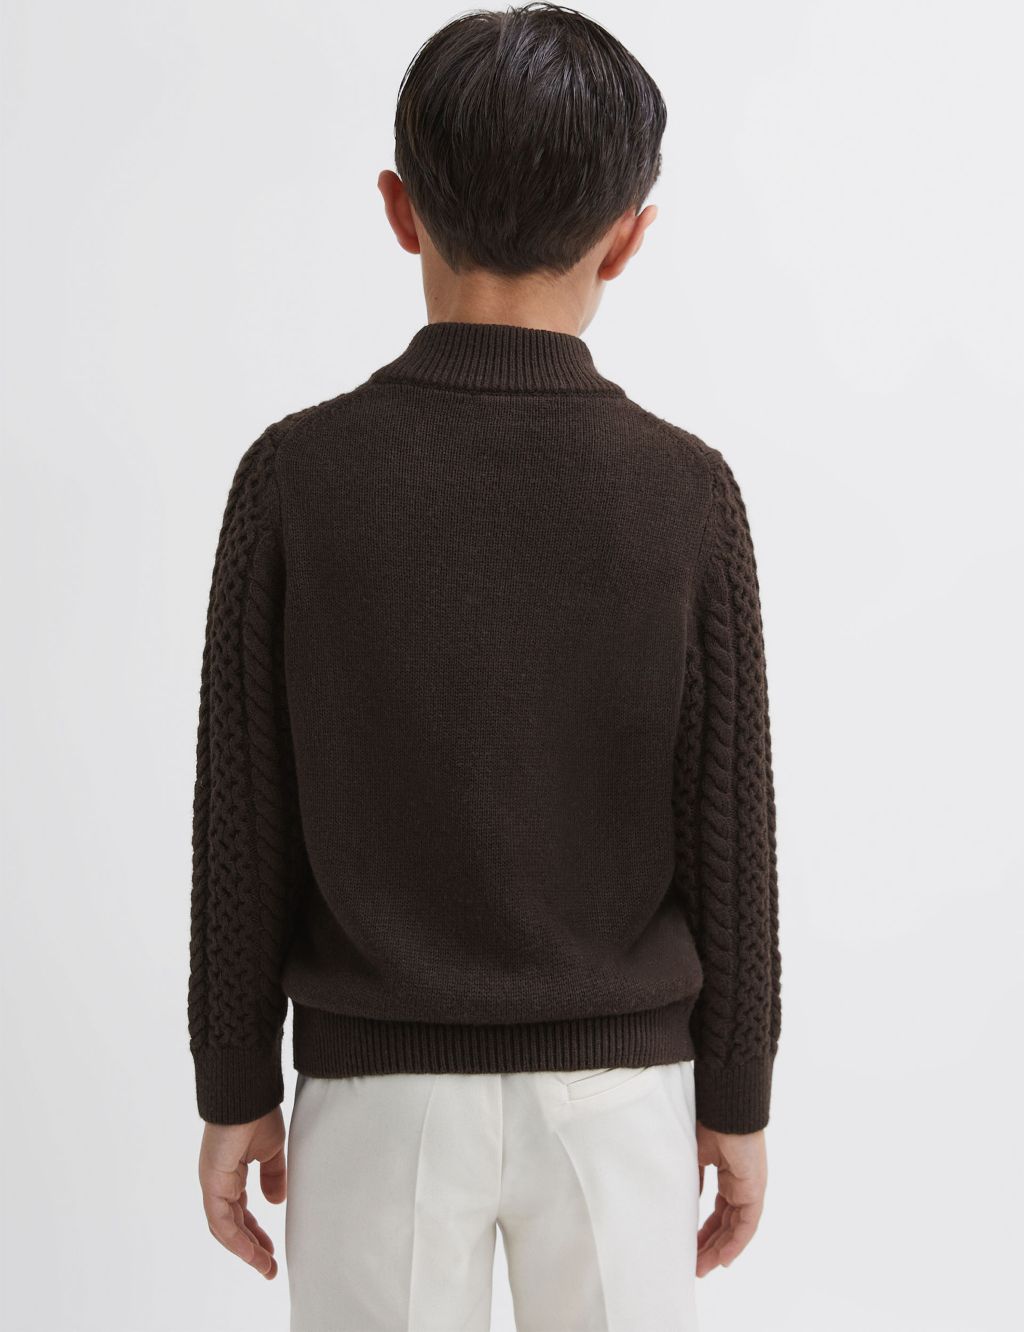 Cable Knit Half Zip Jumper with Wool (3-14 Yrs) image 3